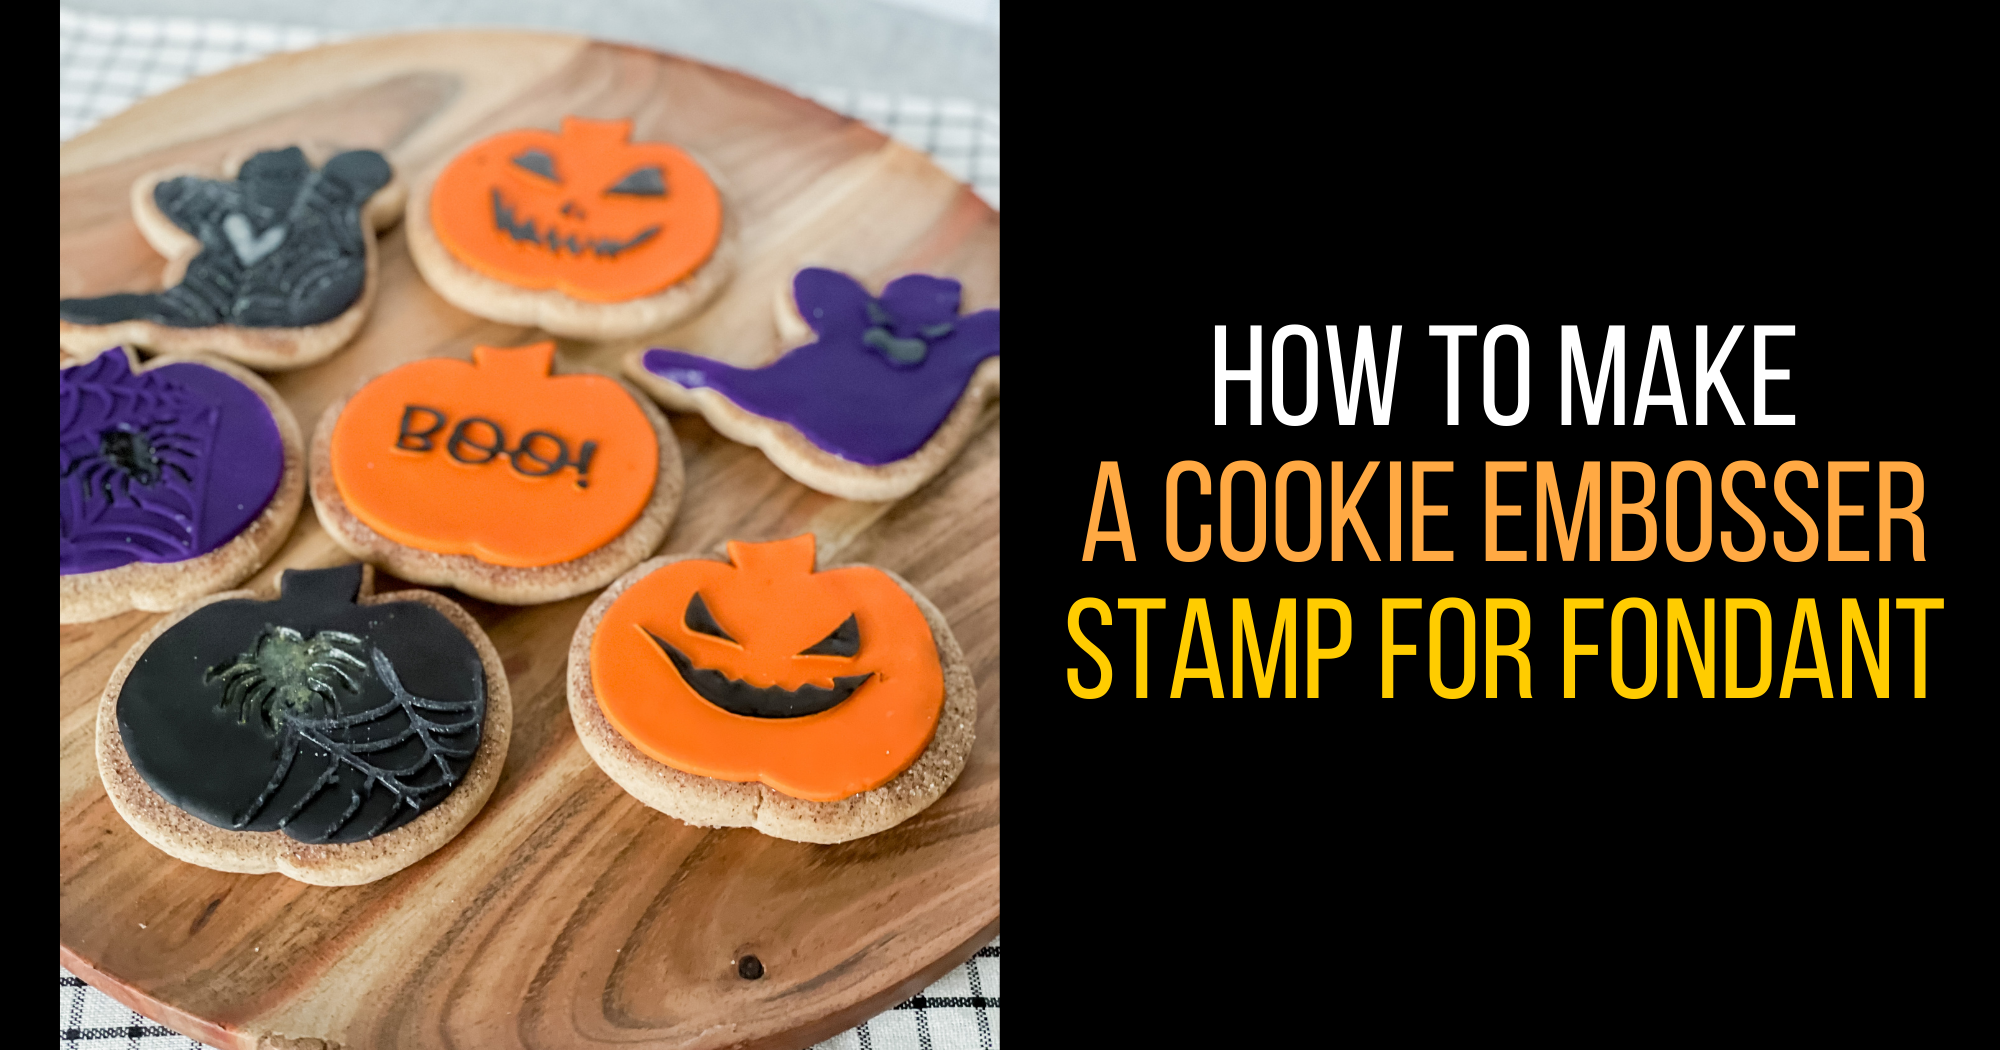 How to Make a Cookie Embosser Stamp for Fondant